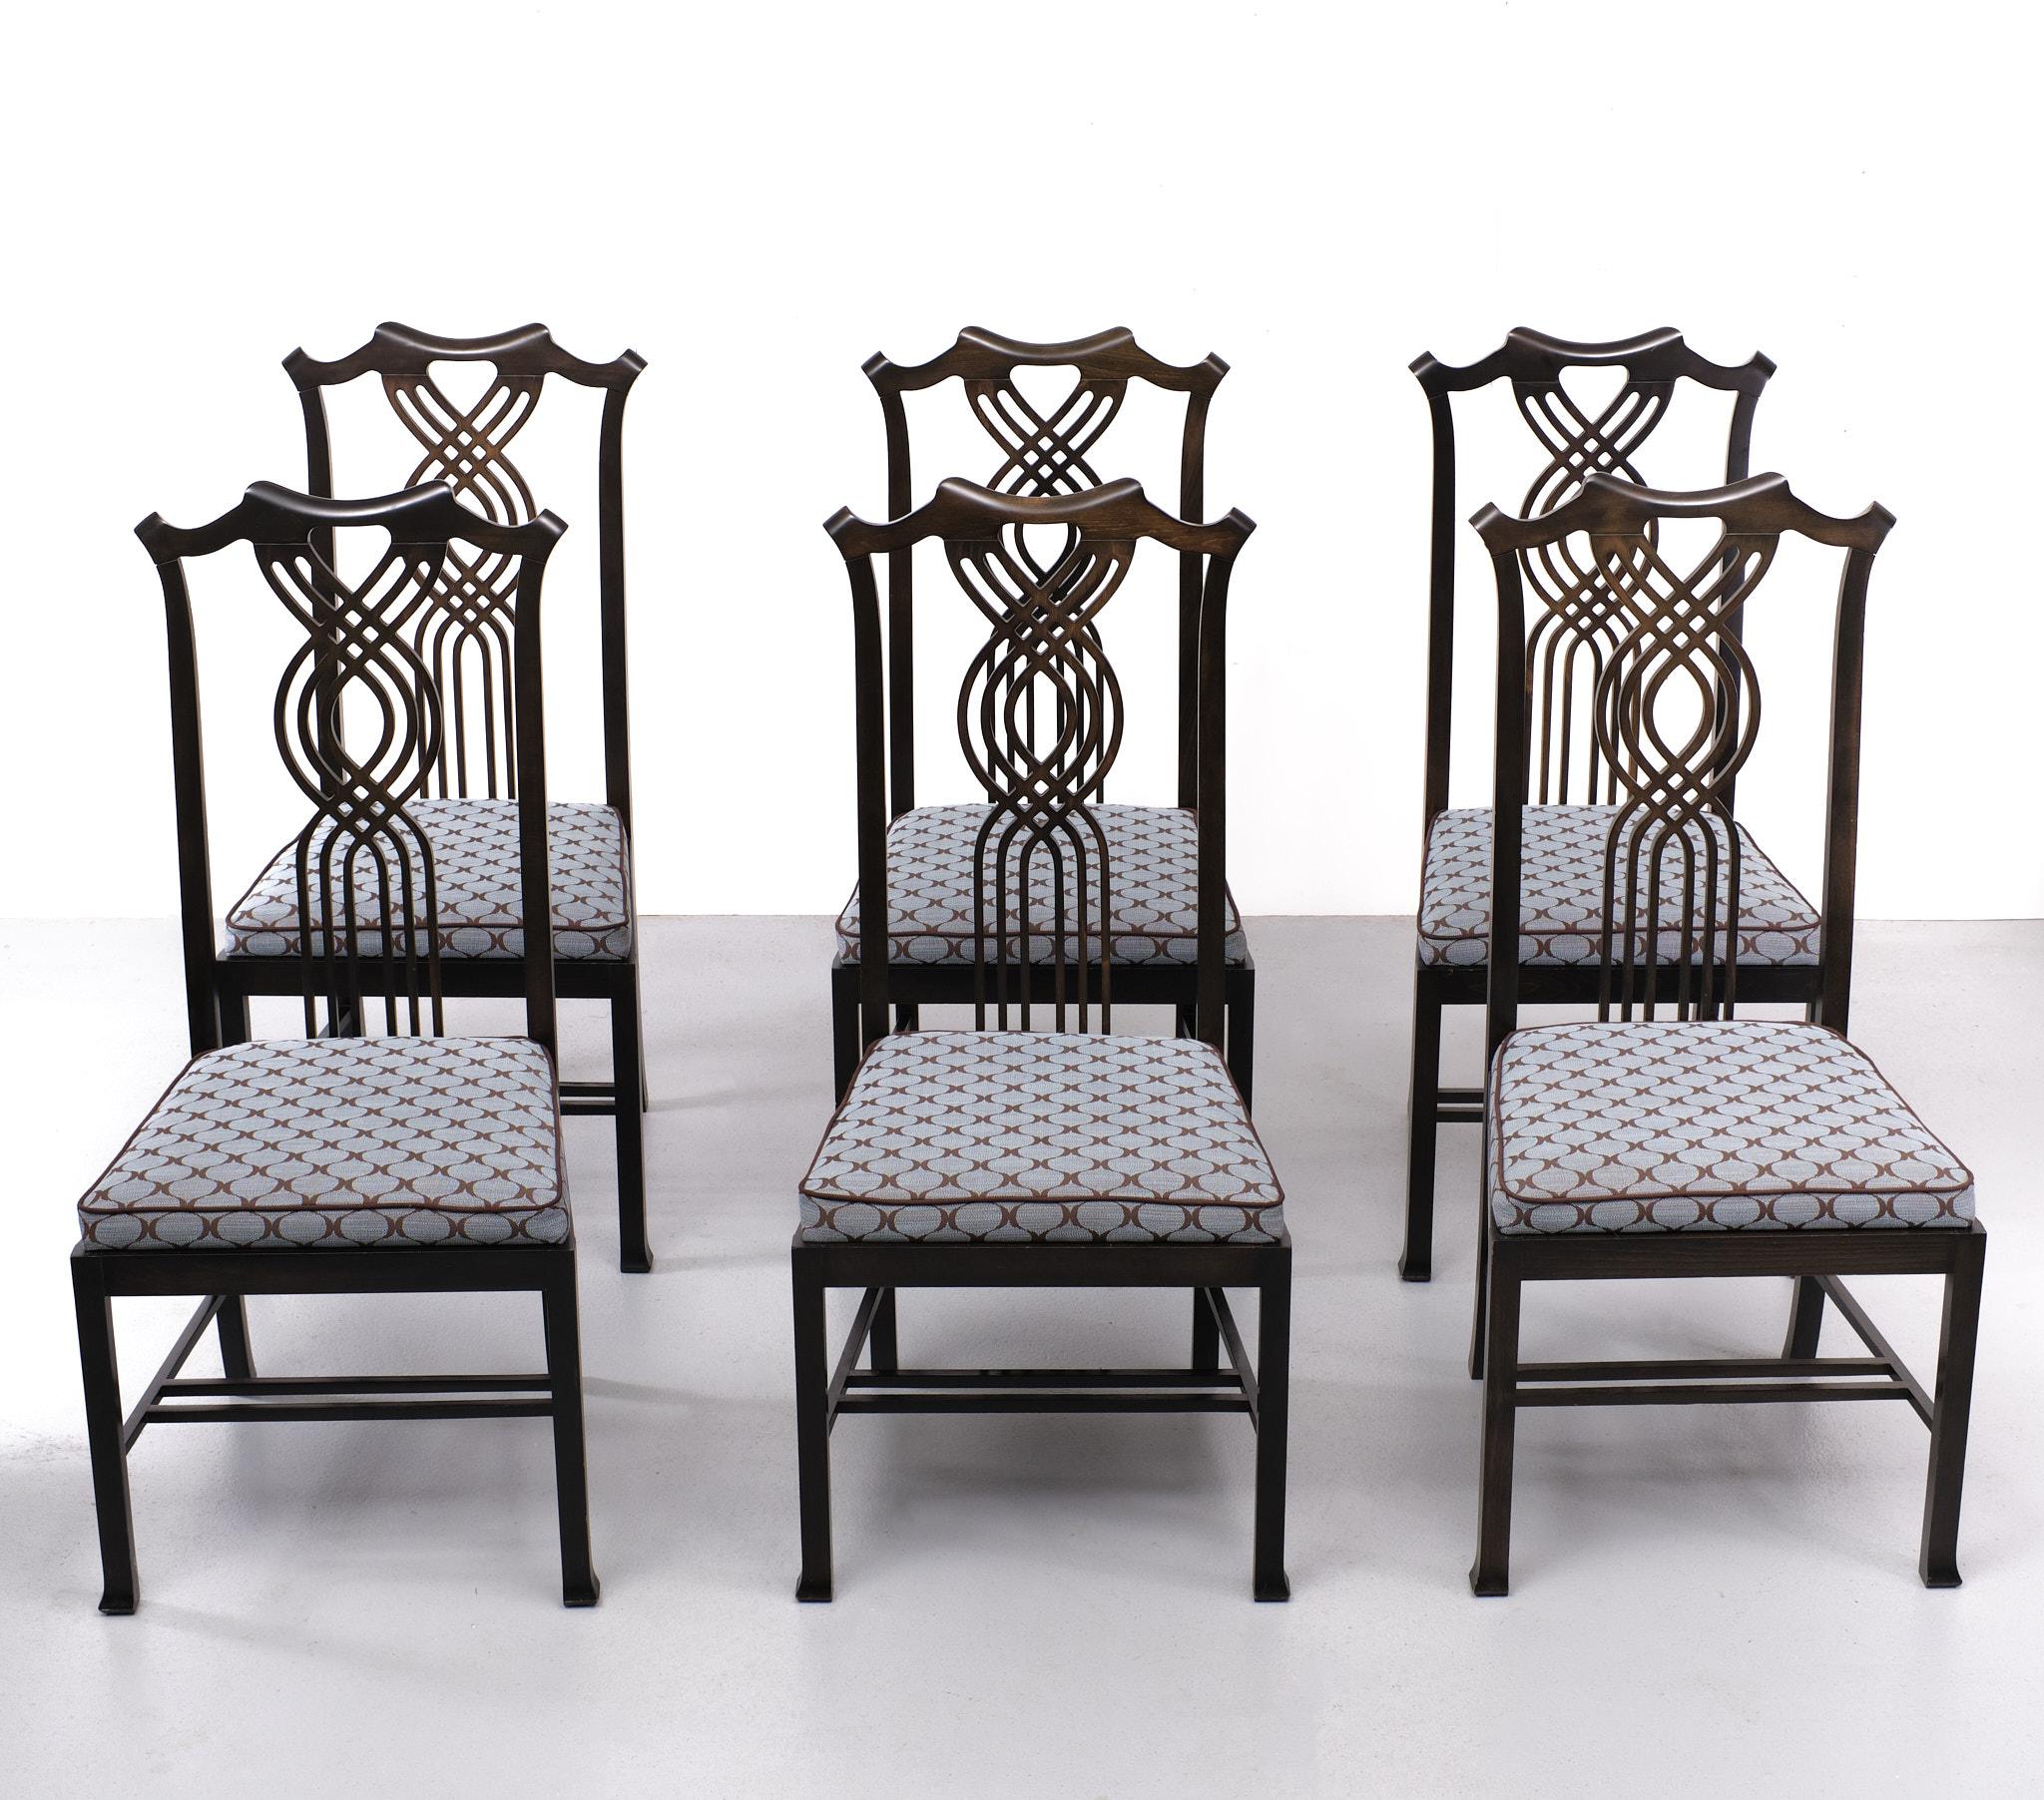 Neoclassical Giorgetti dining chairs  Umberto Asnago   1980s Italy